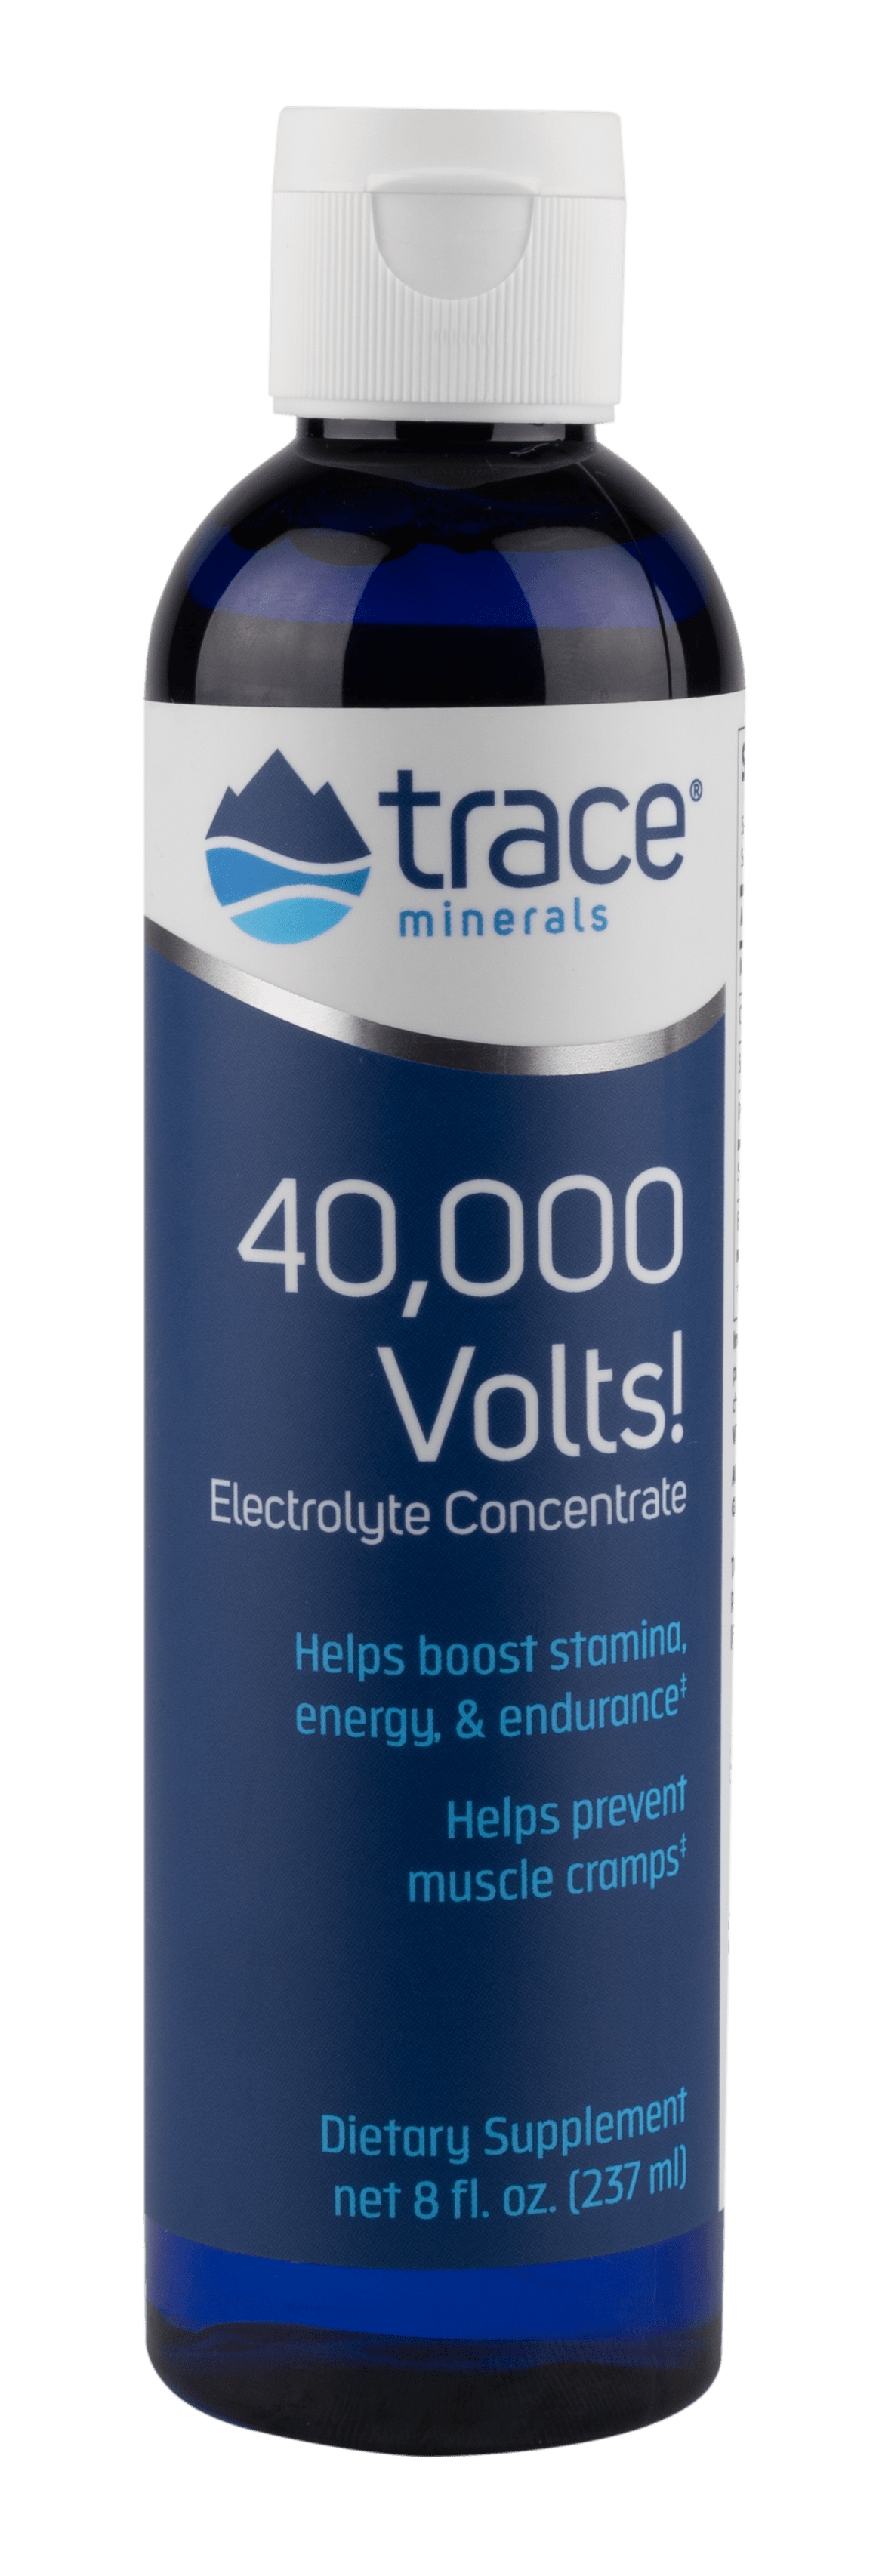 40,000 VOLTS! ELECTROLYTE CONCENTRATE BY TRACE MINERALS 